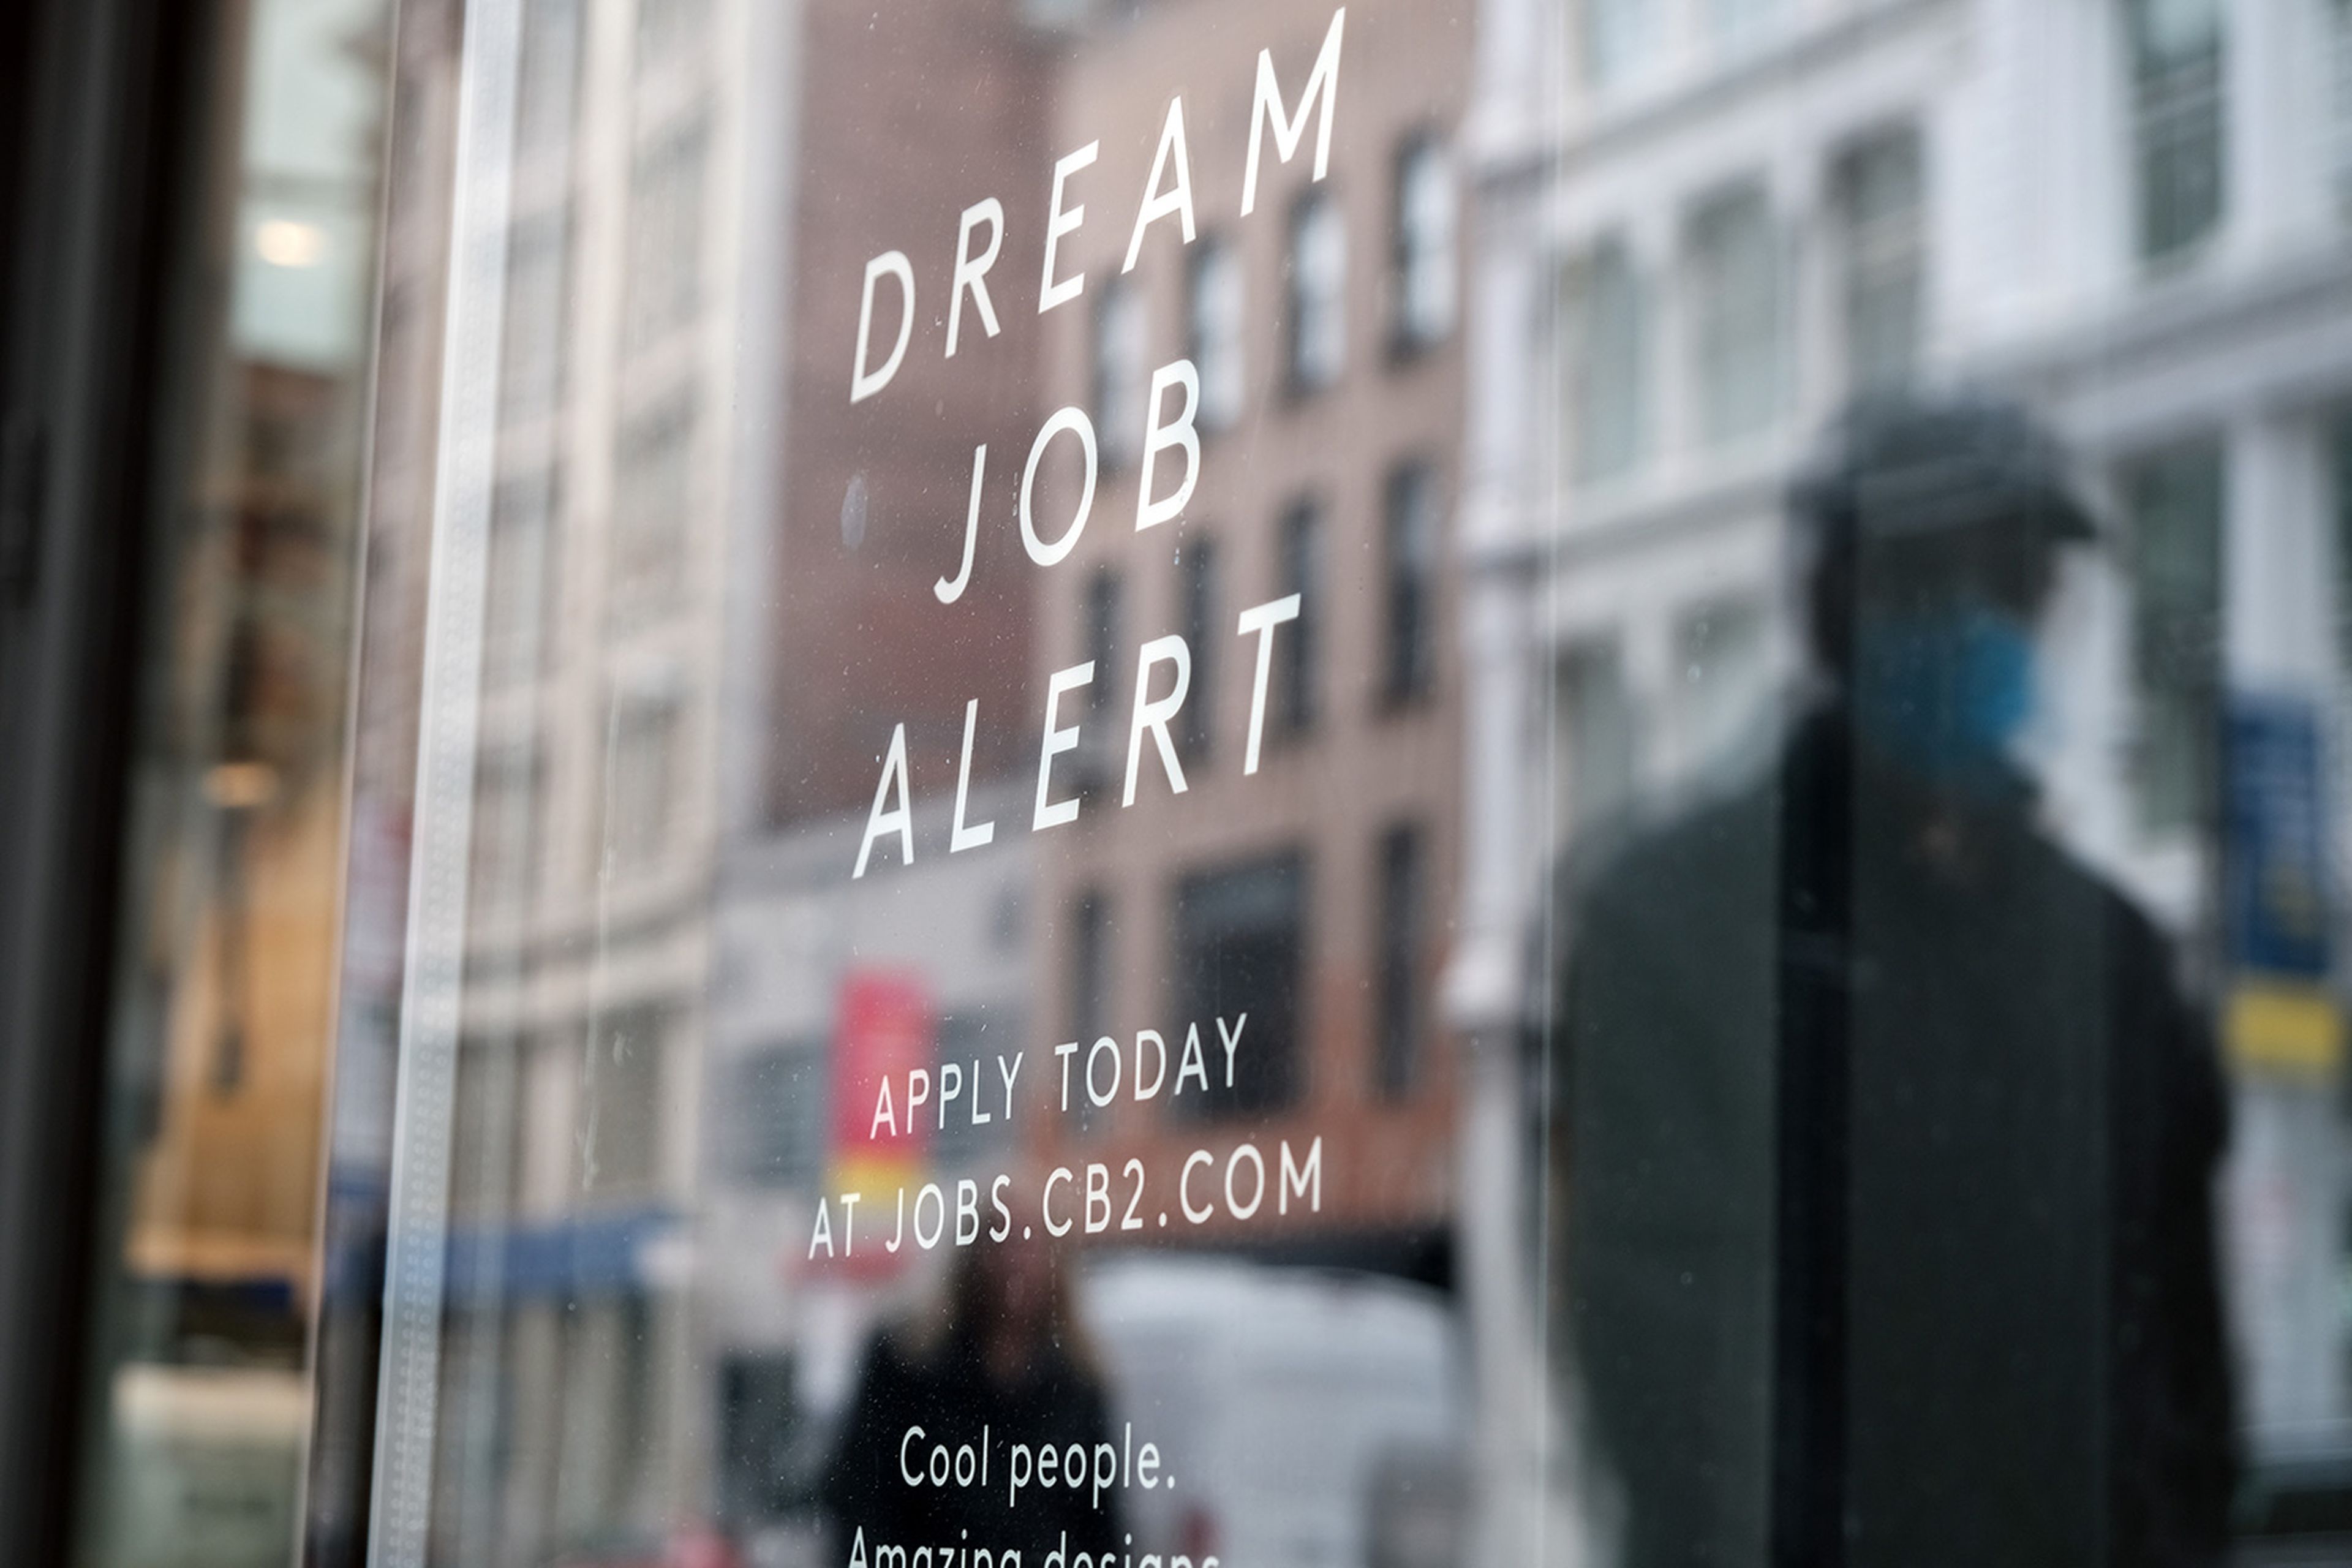 The FBI is warning employers of applicants for remote work using stolen PII or even deepfakes. Pictured: A &#8220;help wanted&#8221; sign is displayed in a Manhattan store on May 6, 2022, in New York City. (Photo by Spencer Platt/Getty Images)